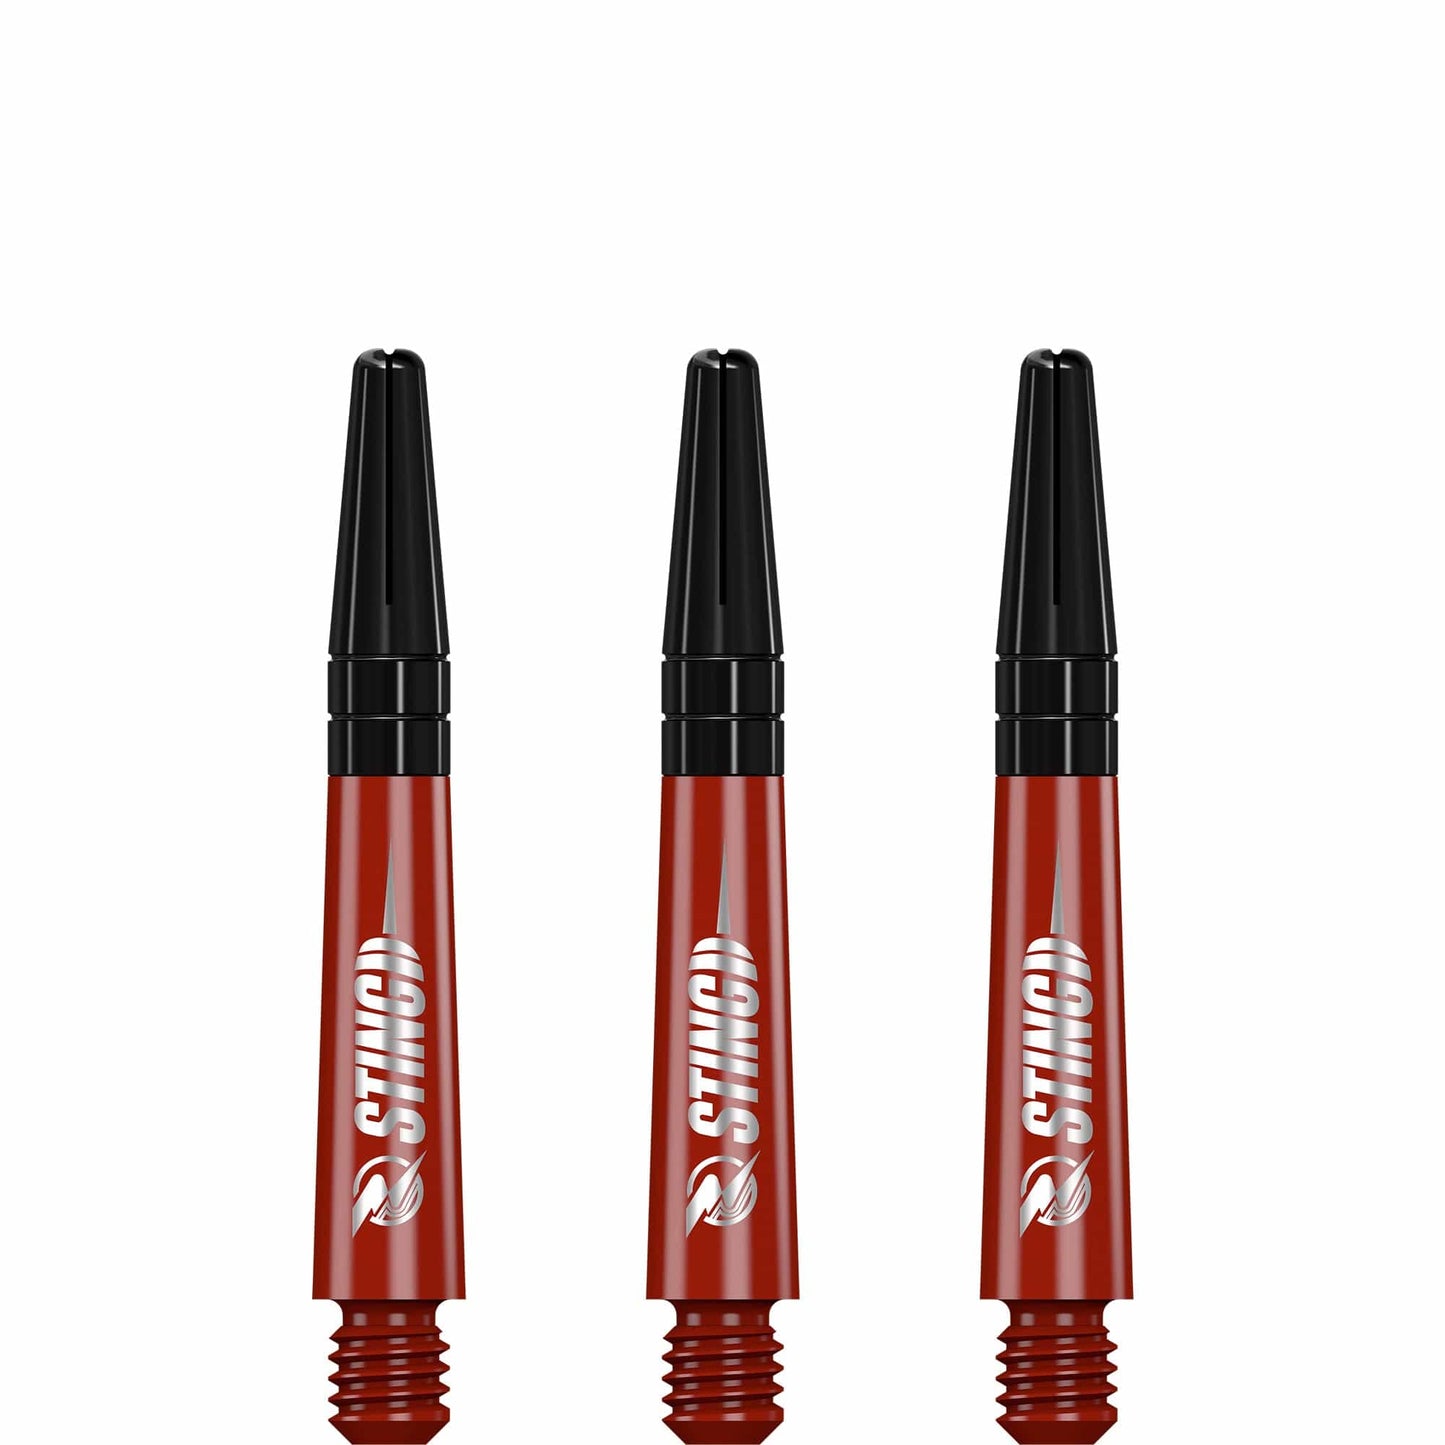 Ruthless Sting Dart Shafts - Polycarbonate - Solid Red - Black Top Short